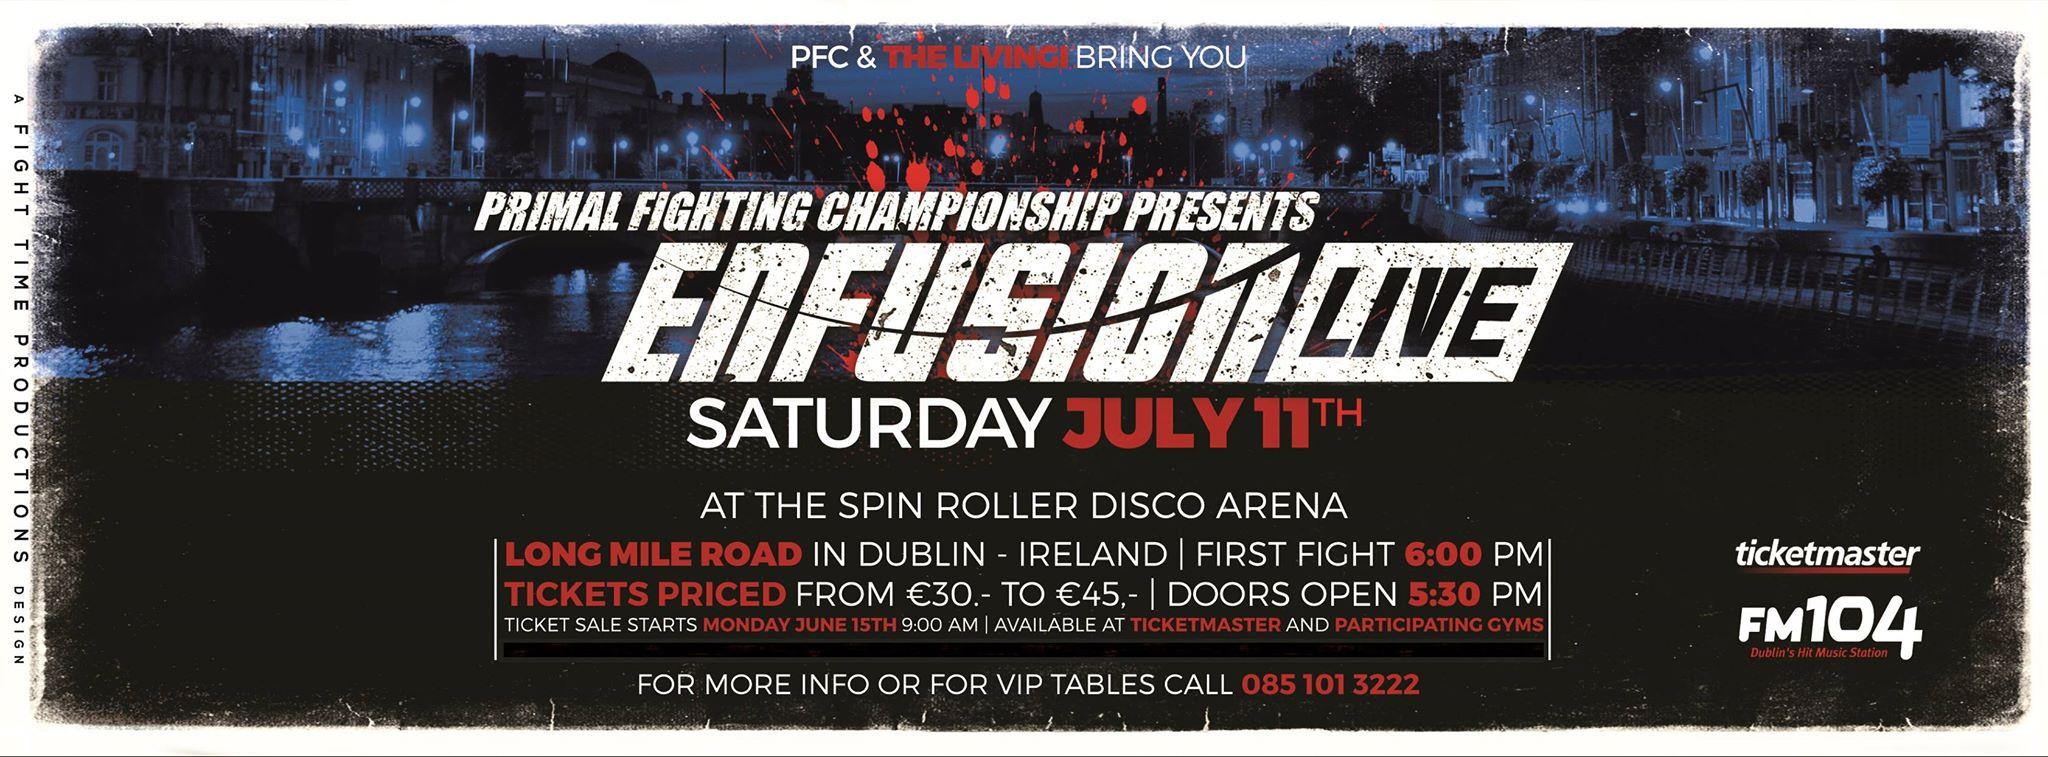 Enfusion Live #30 – Saturday July 11th 2015